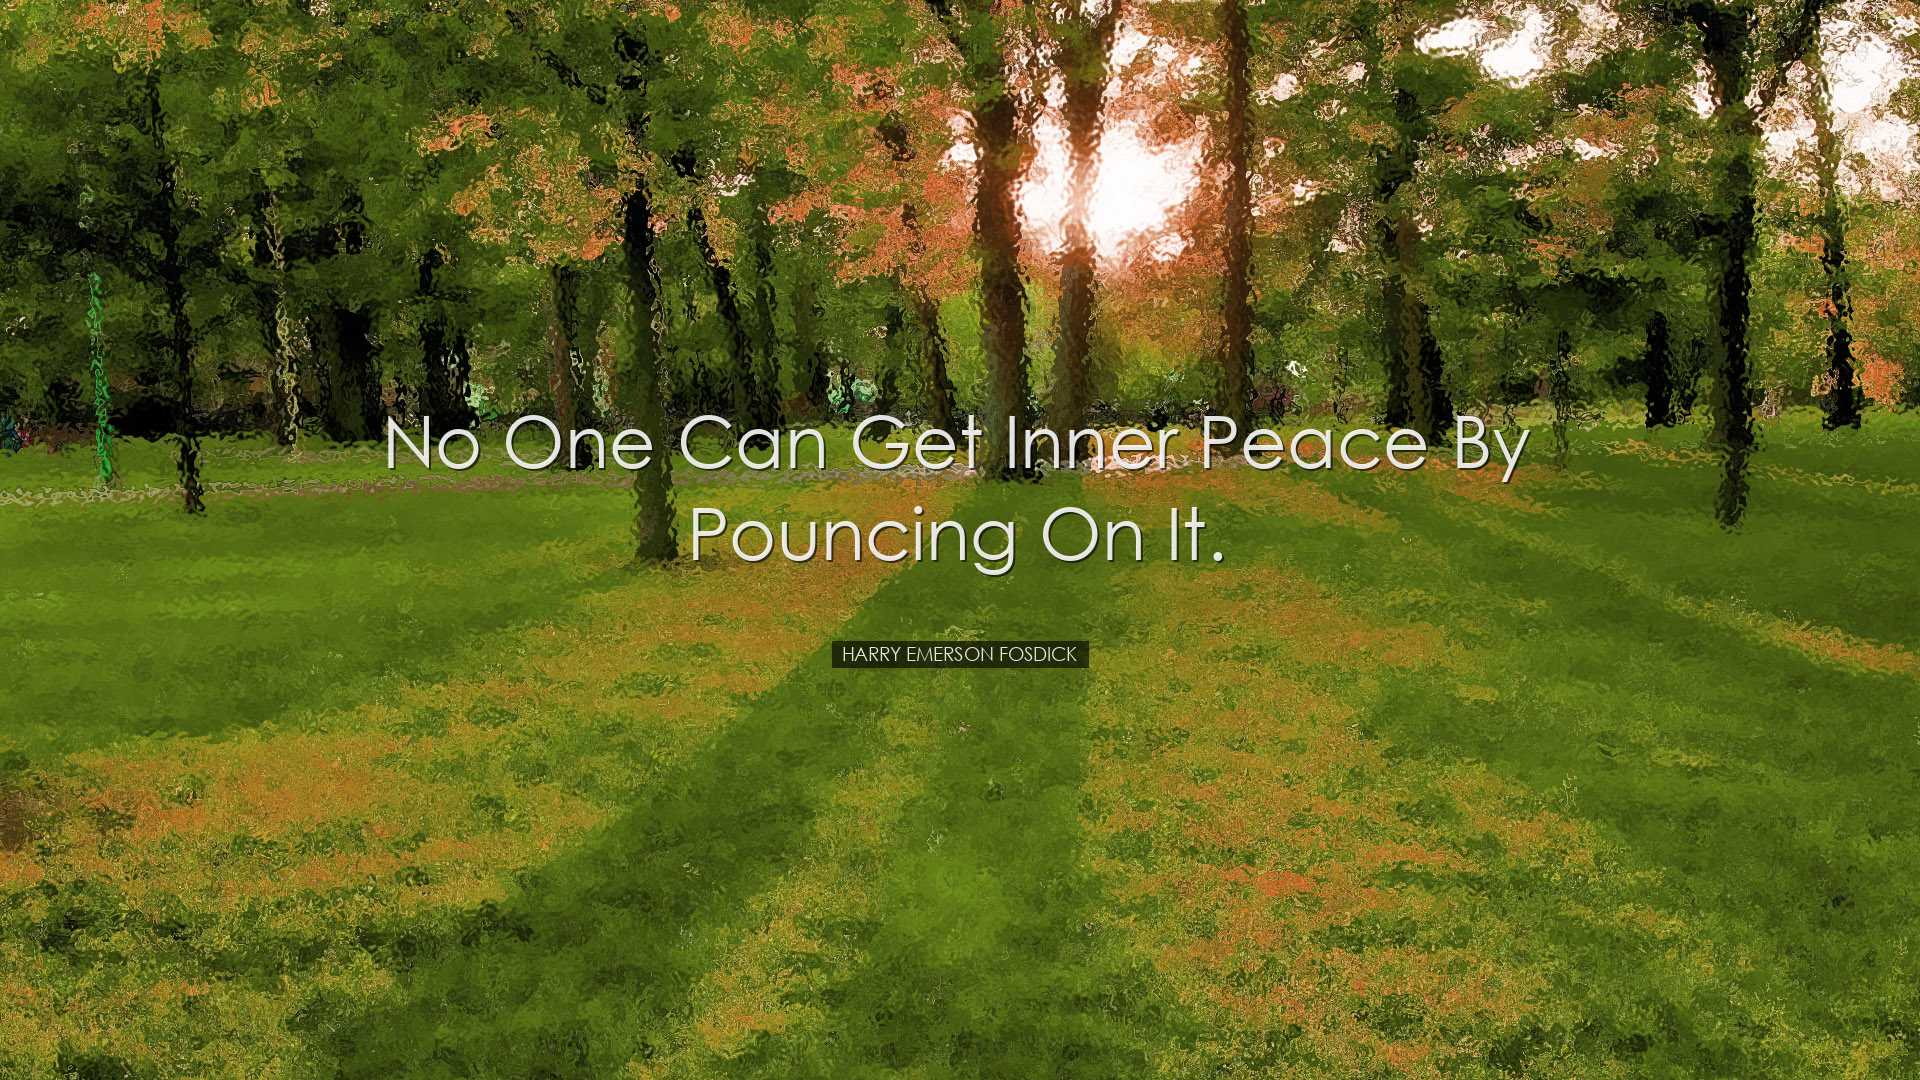 No one can get inner peace by pouncing on it. - Harry Emerson Fosd